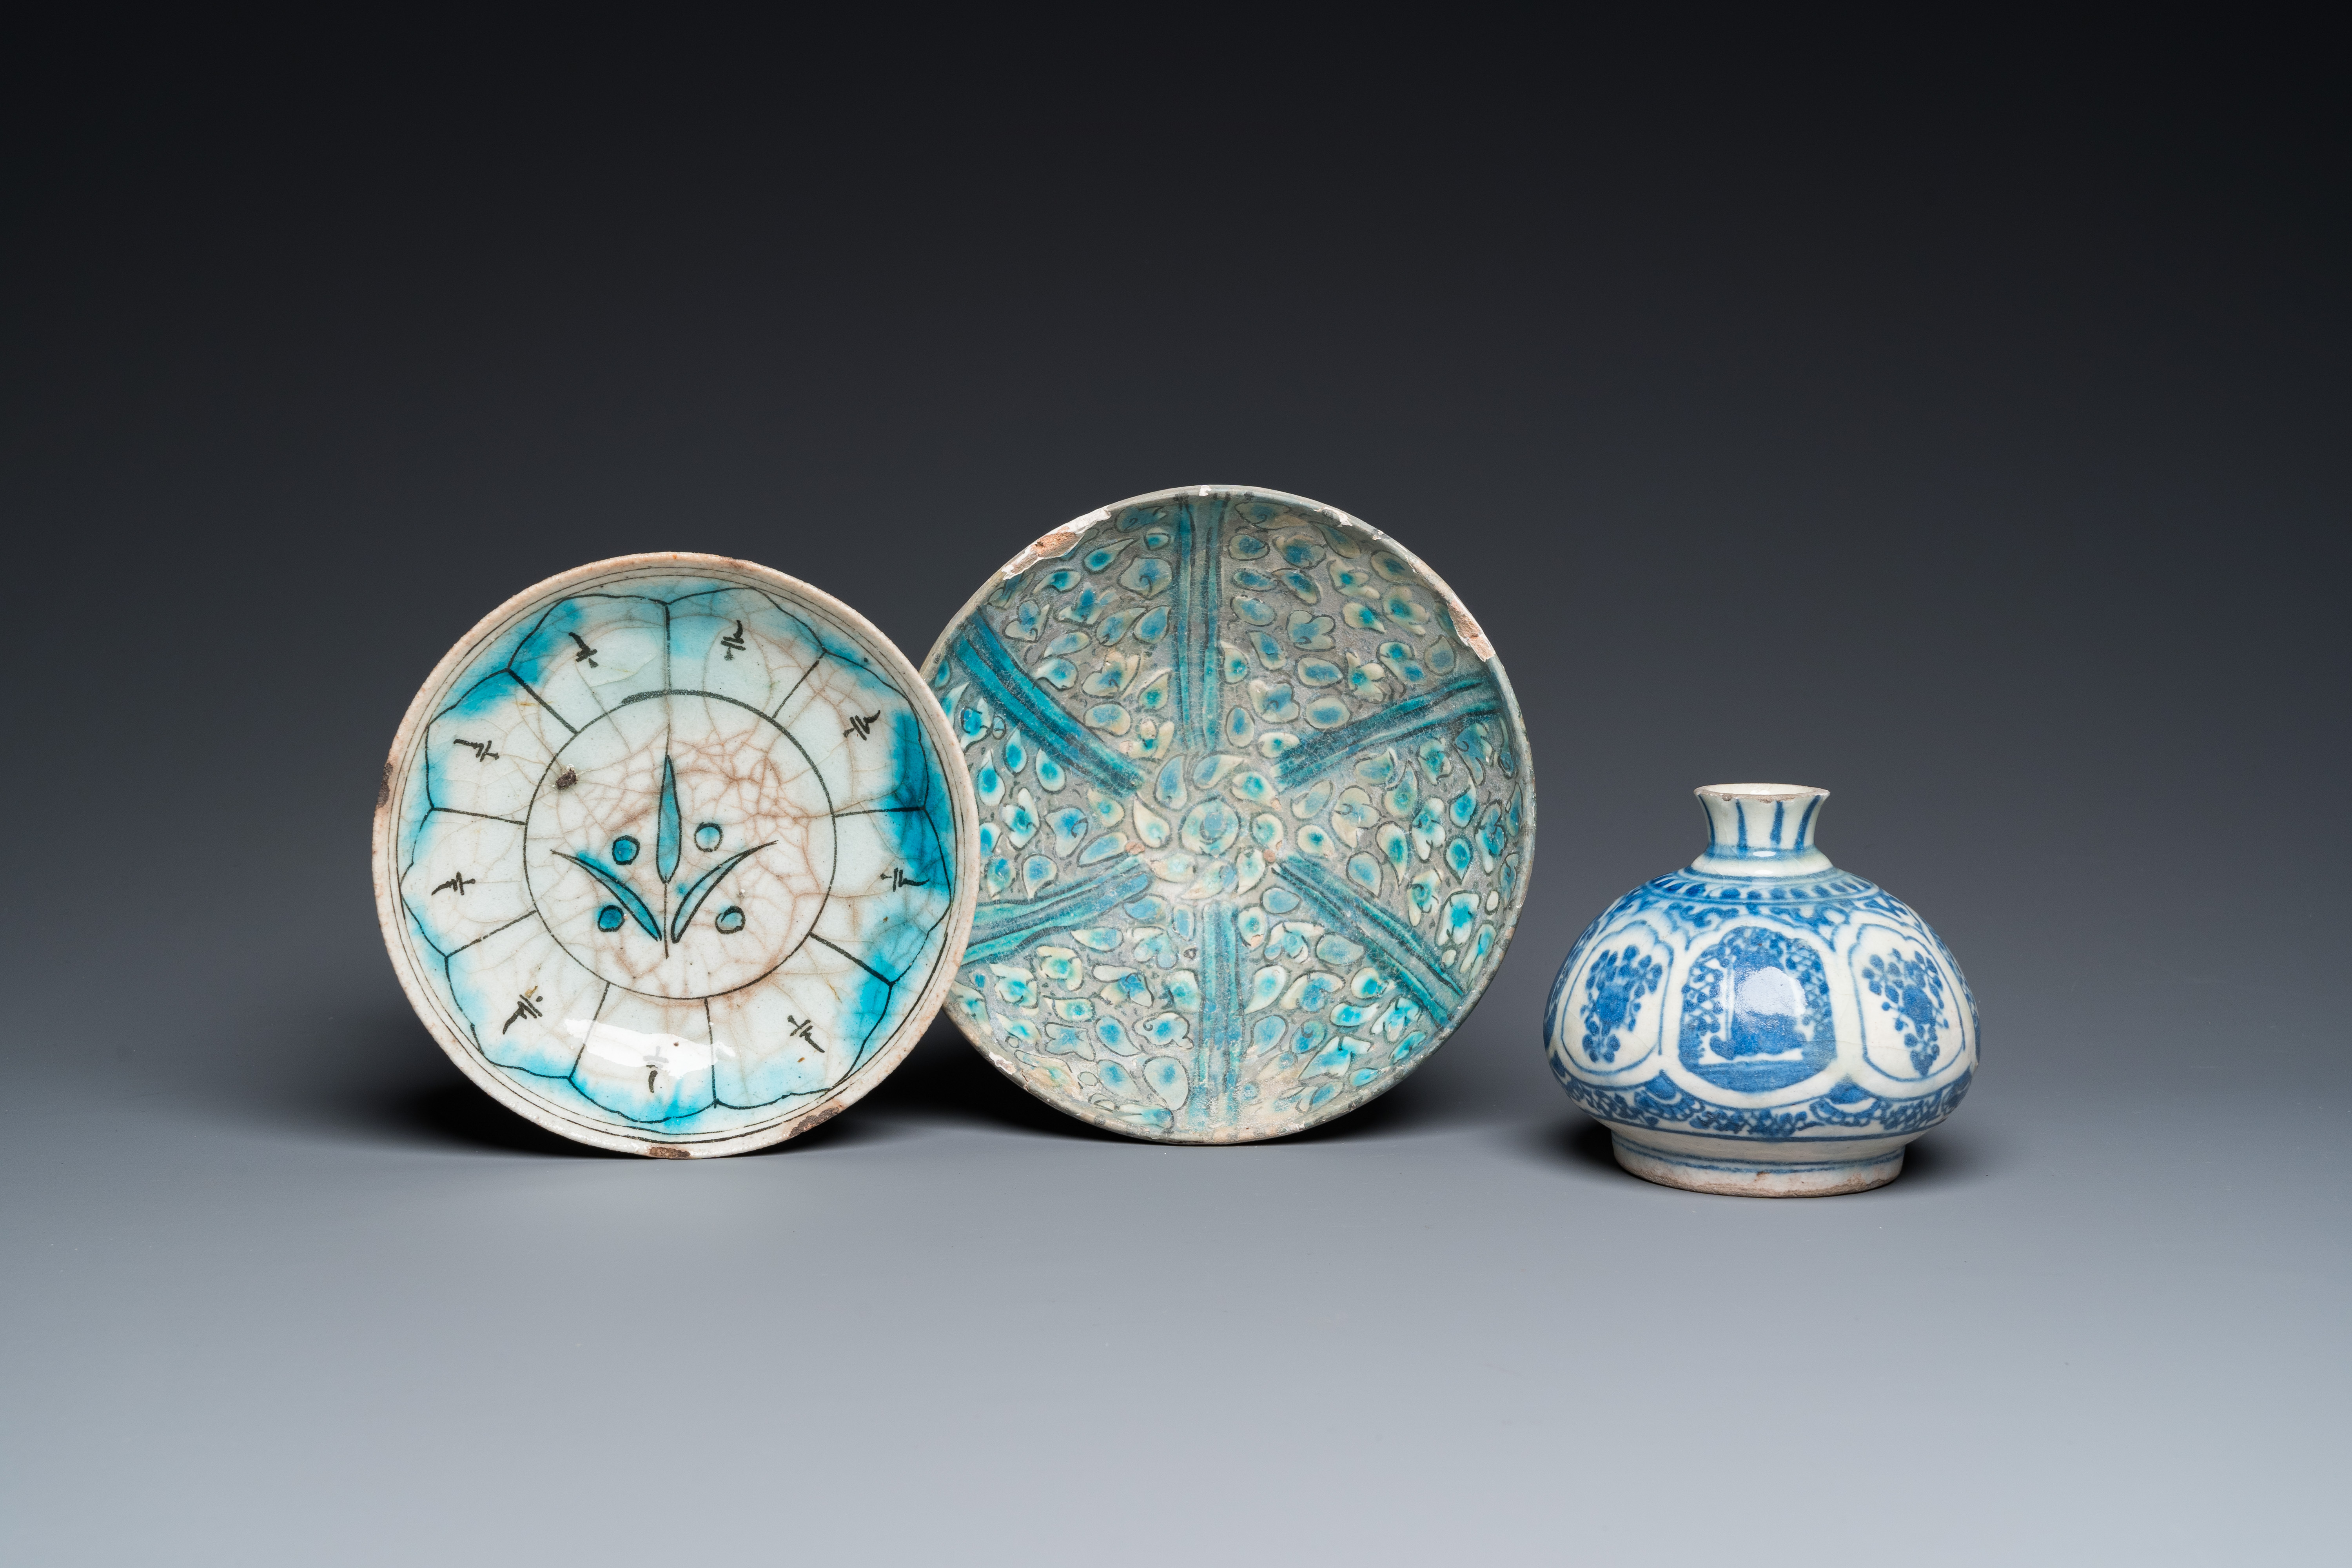 Twelve Ottoman and Persian pottery wares, 13th C. and later - Image 26 of 34